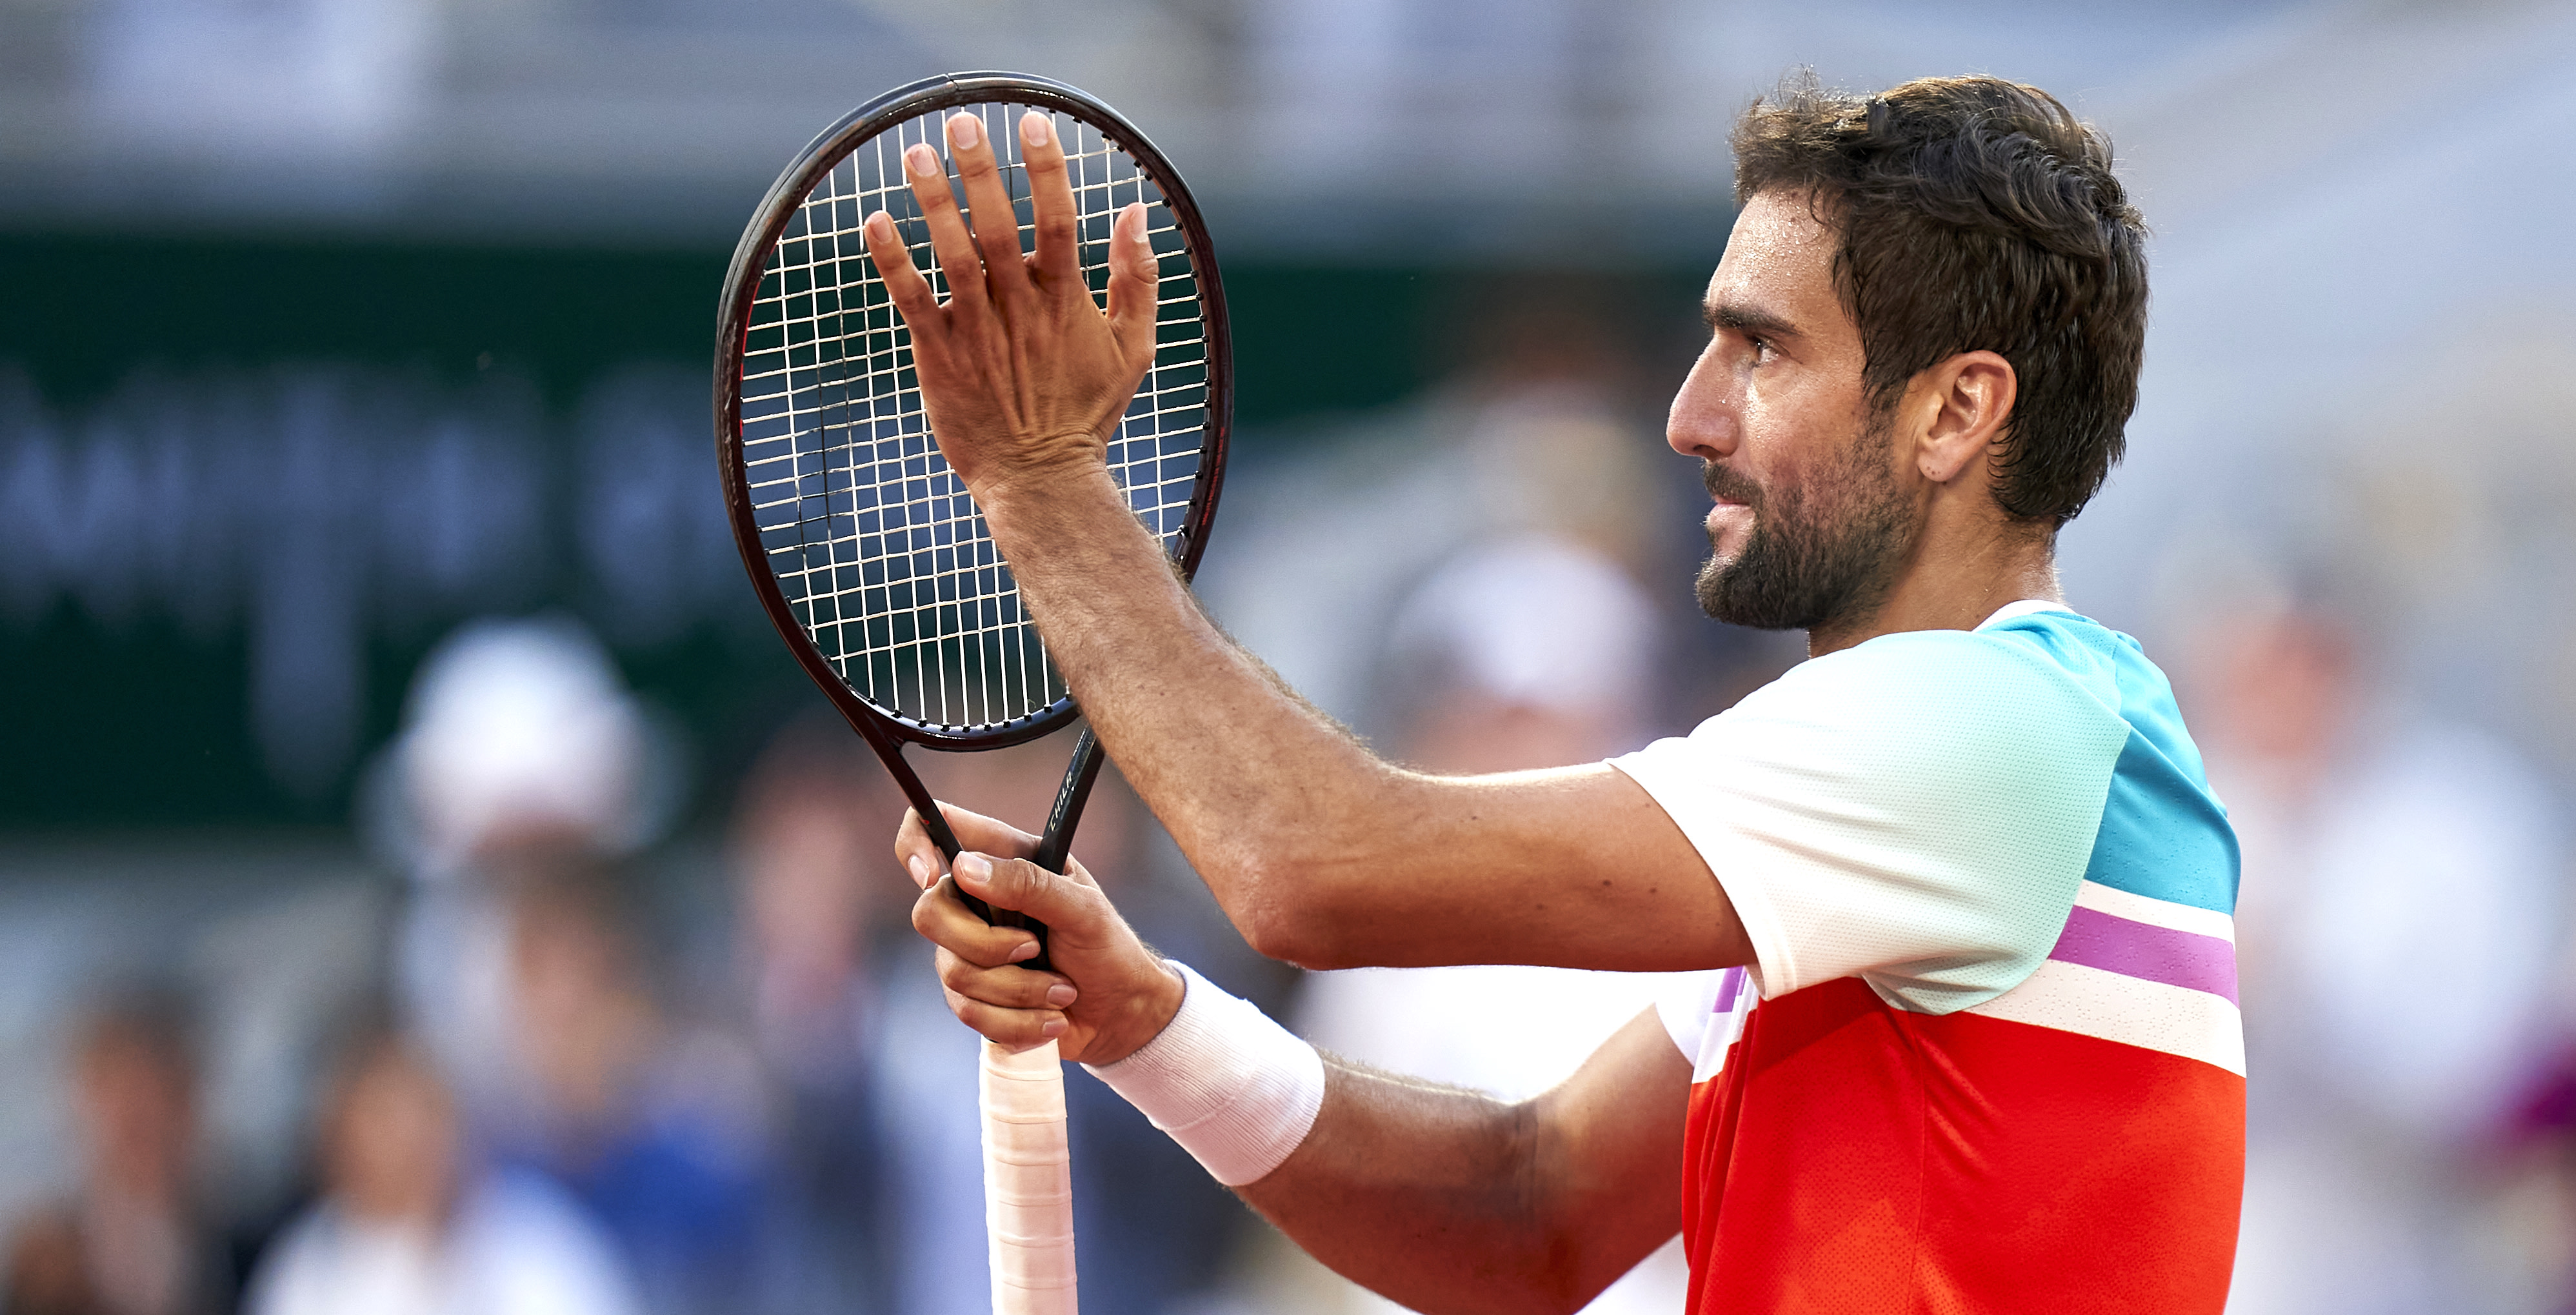 Marin Cilic plays first match since January in Umag following six-month knee surgery lay-off